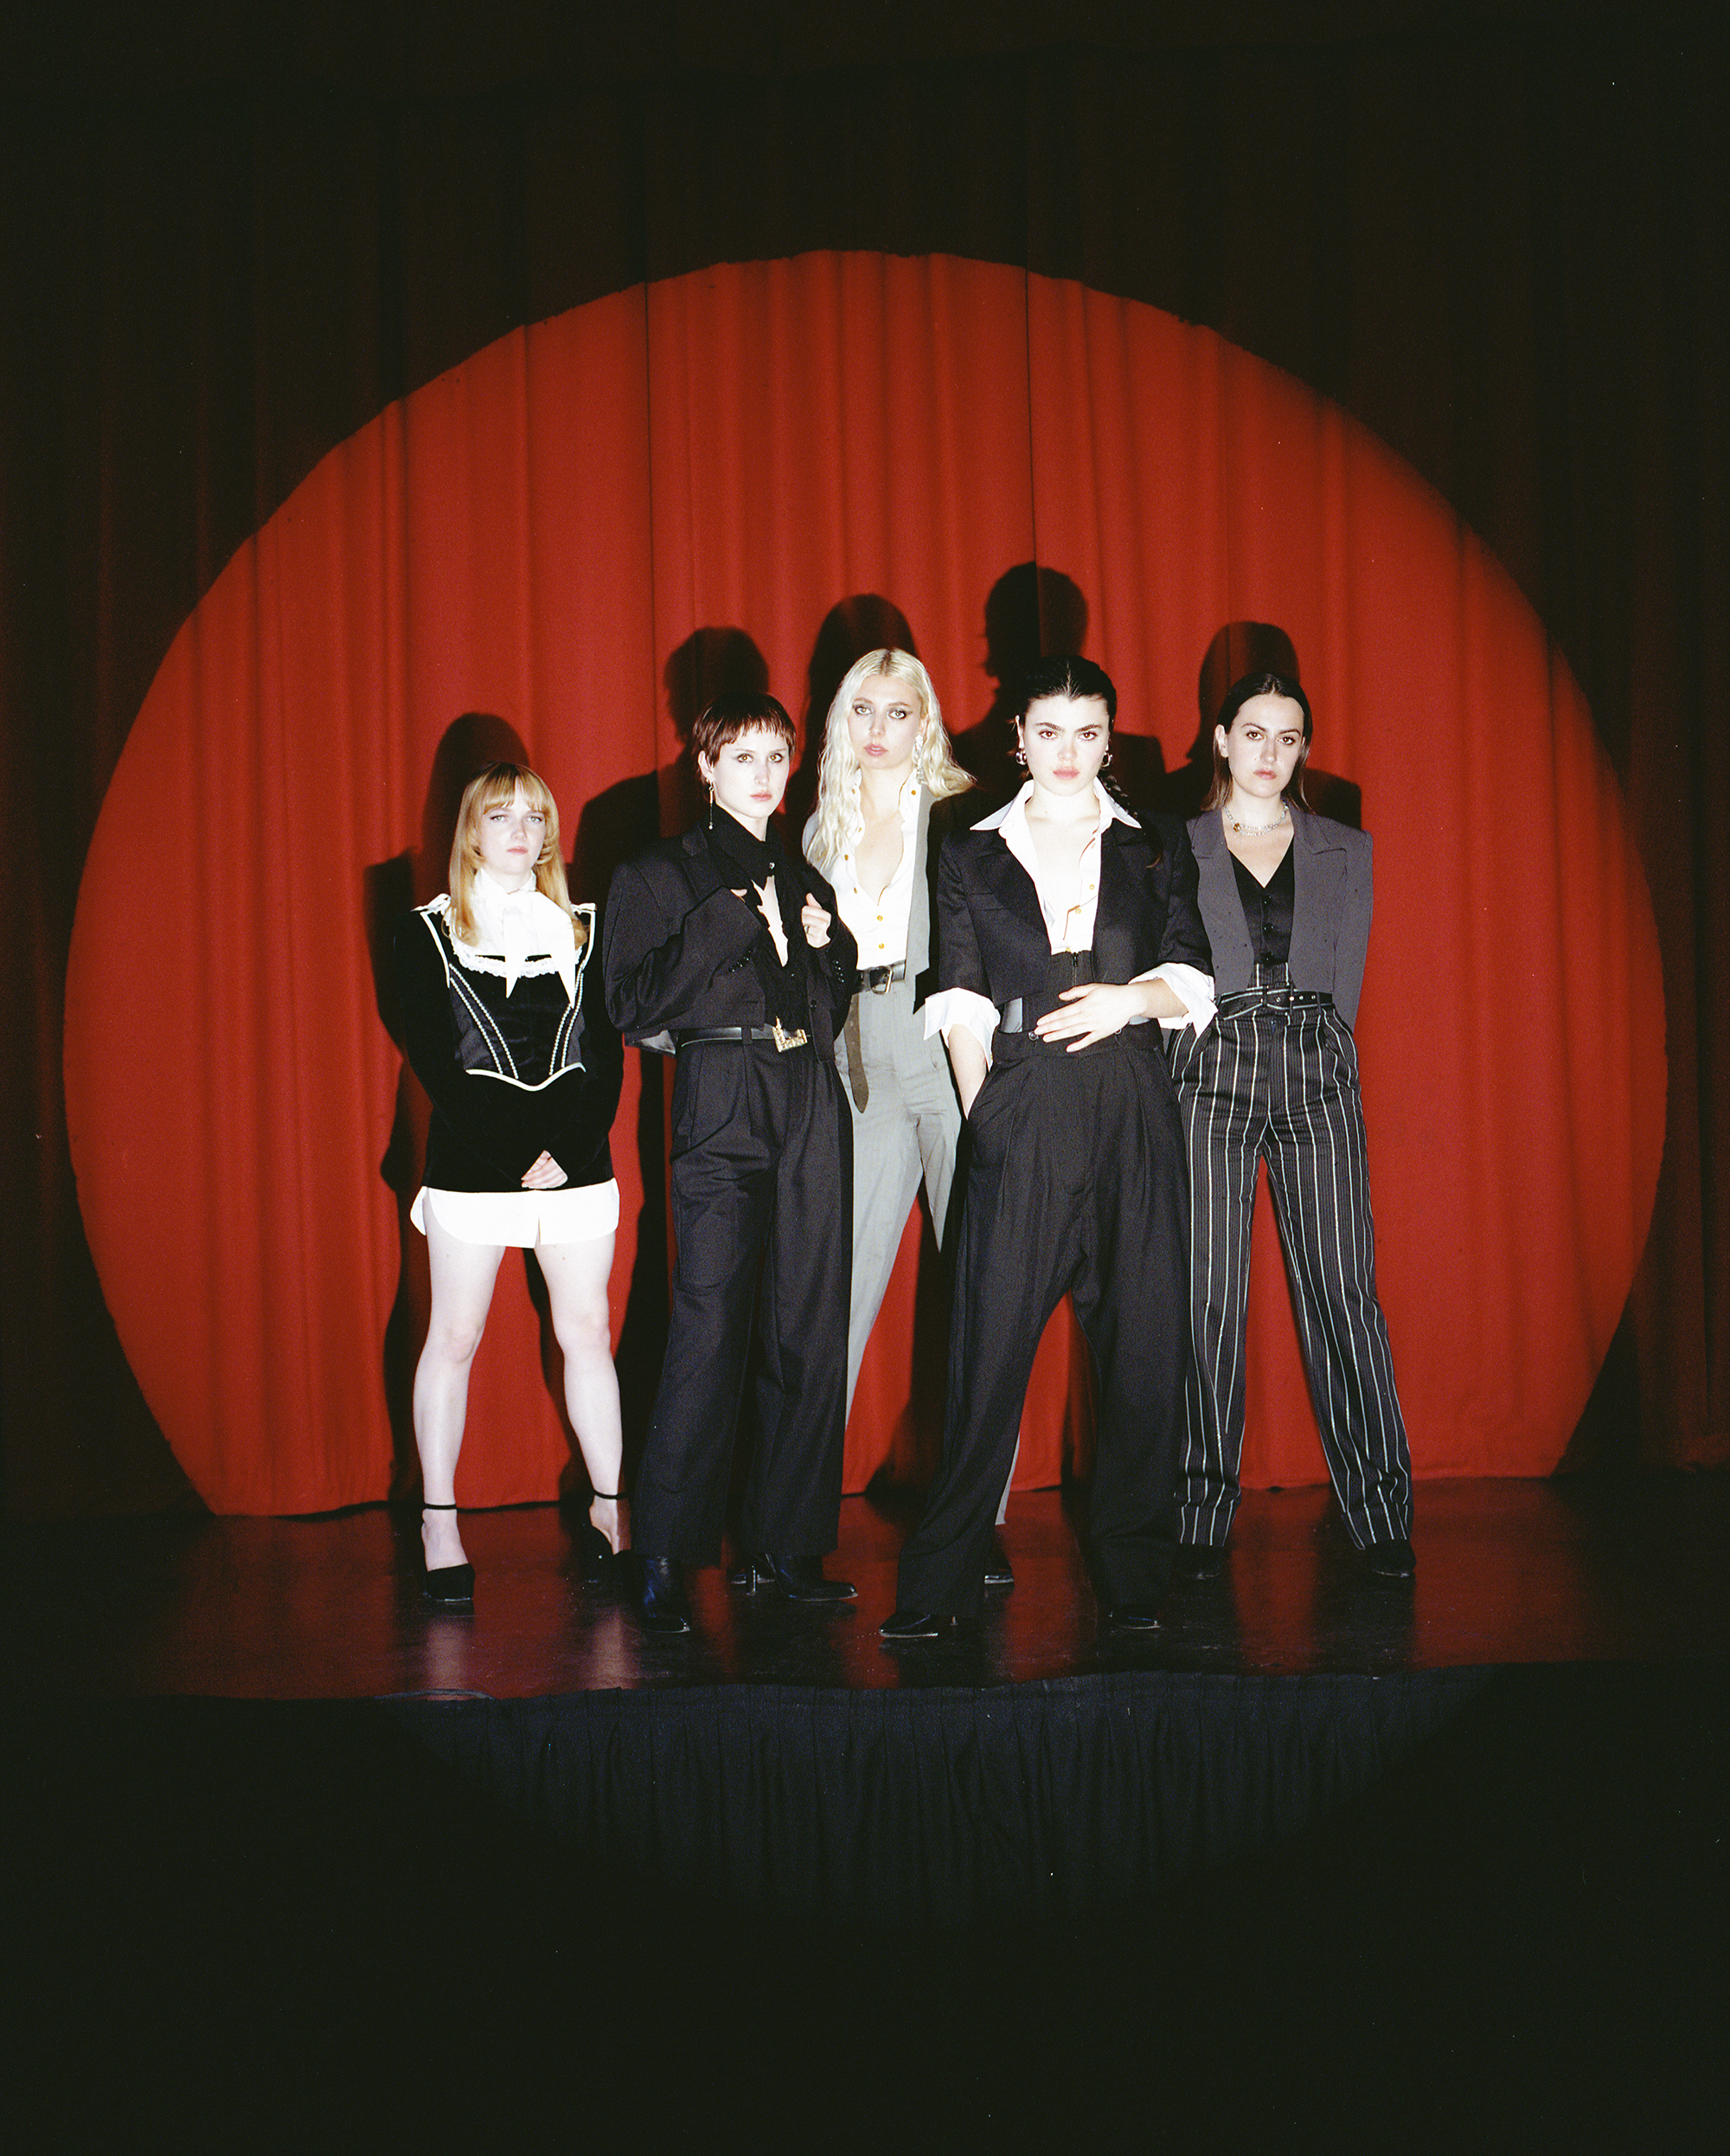 The five members of the Last Dinner Party stand in a spotlighted circle, with a red curtain behind them